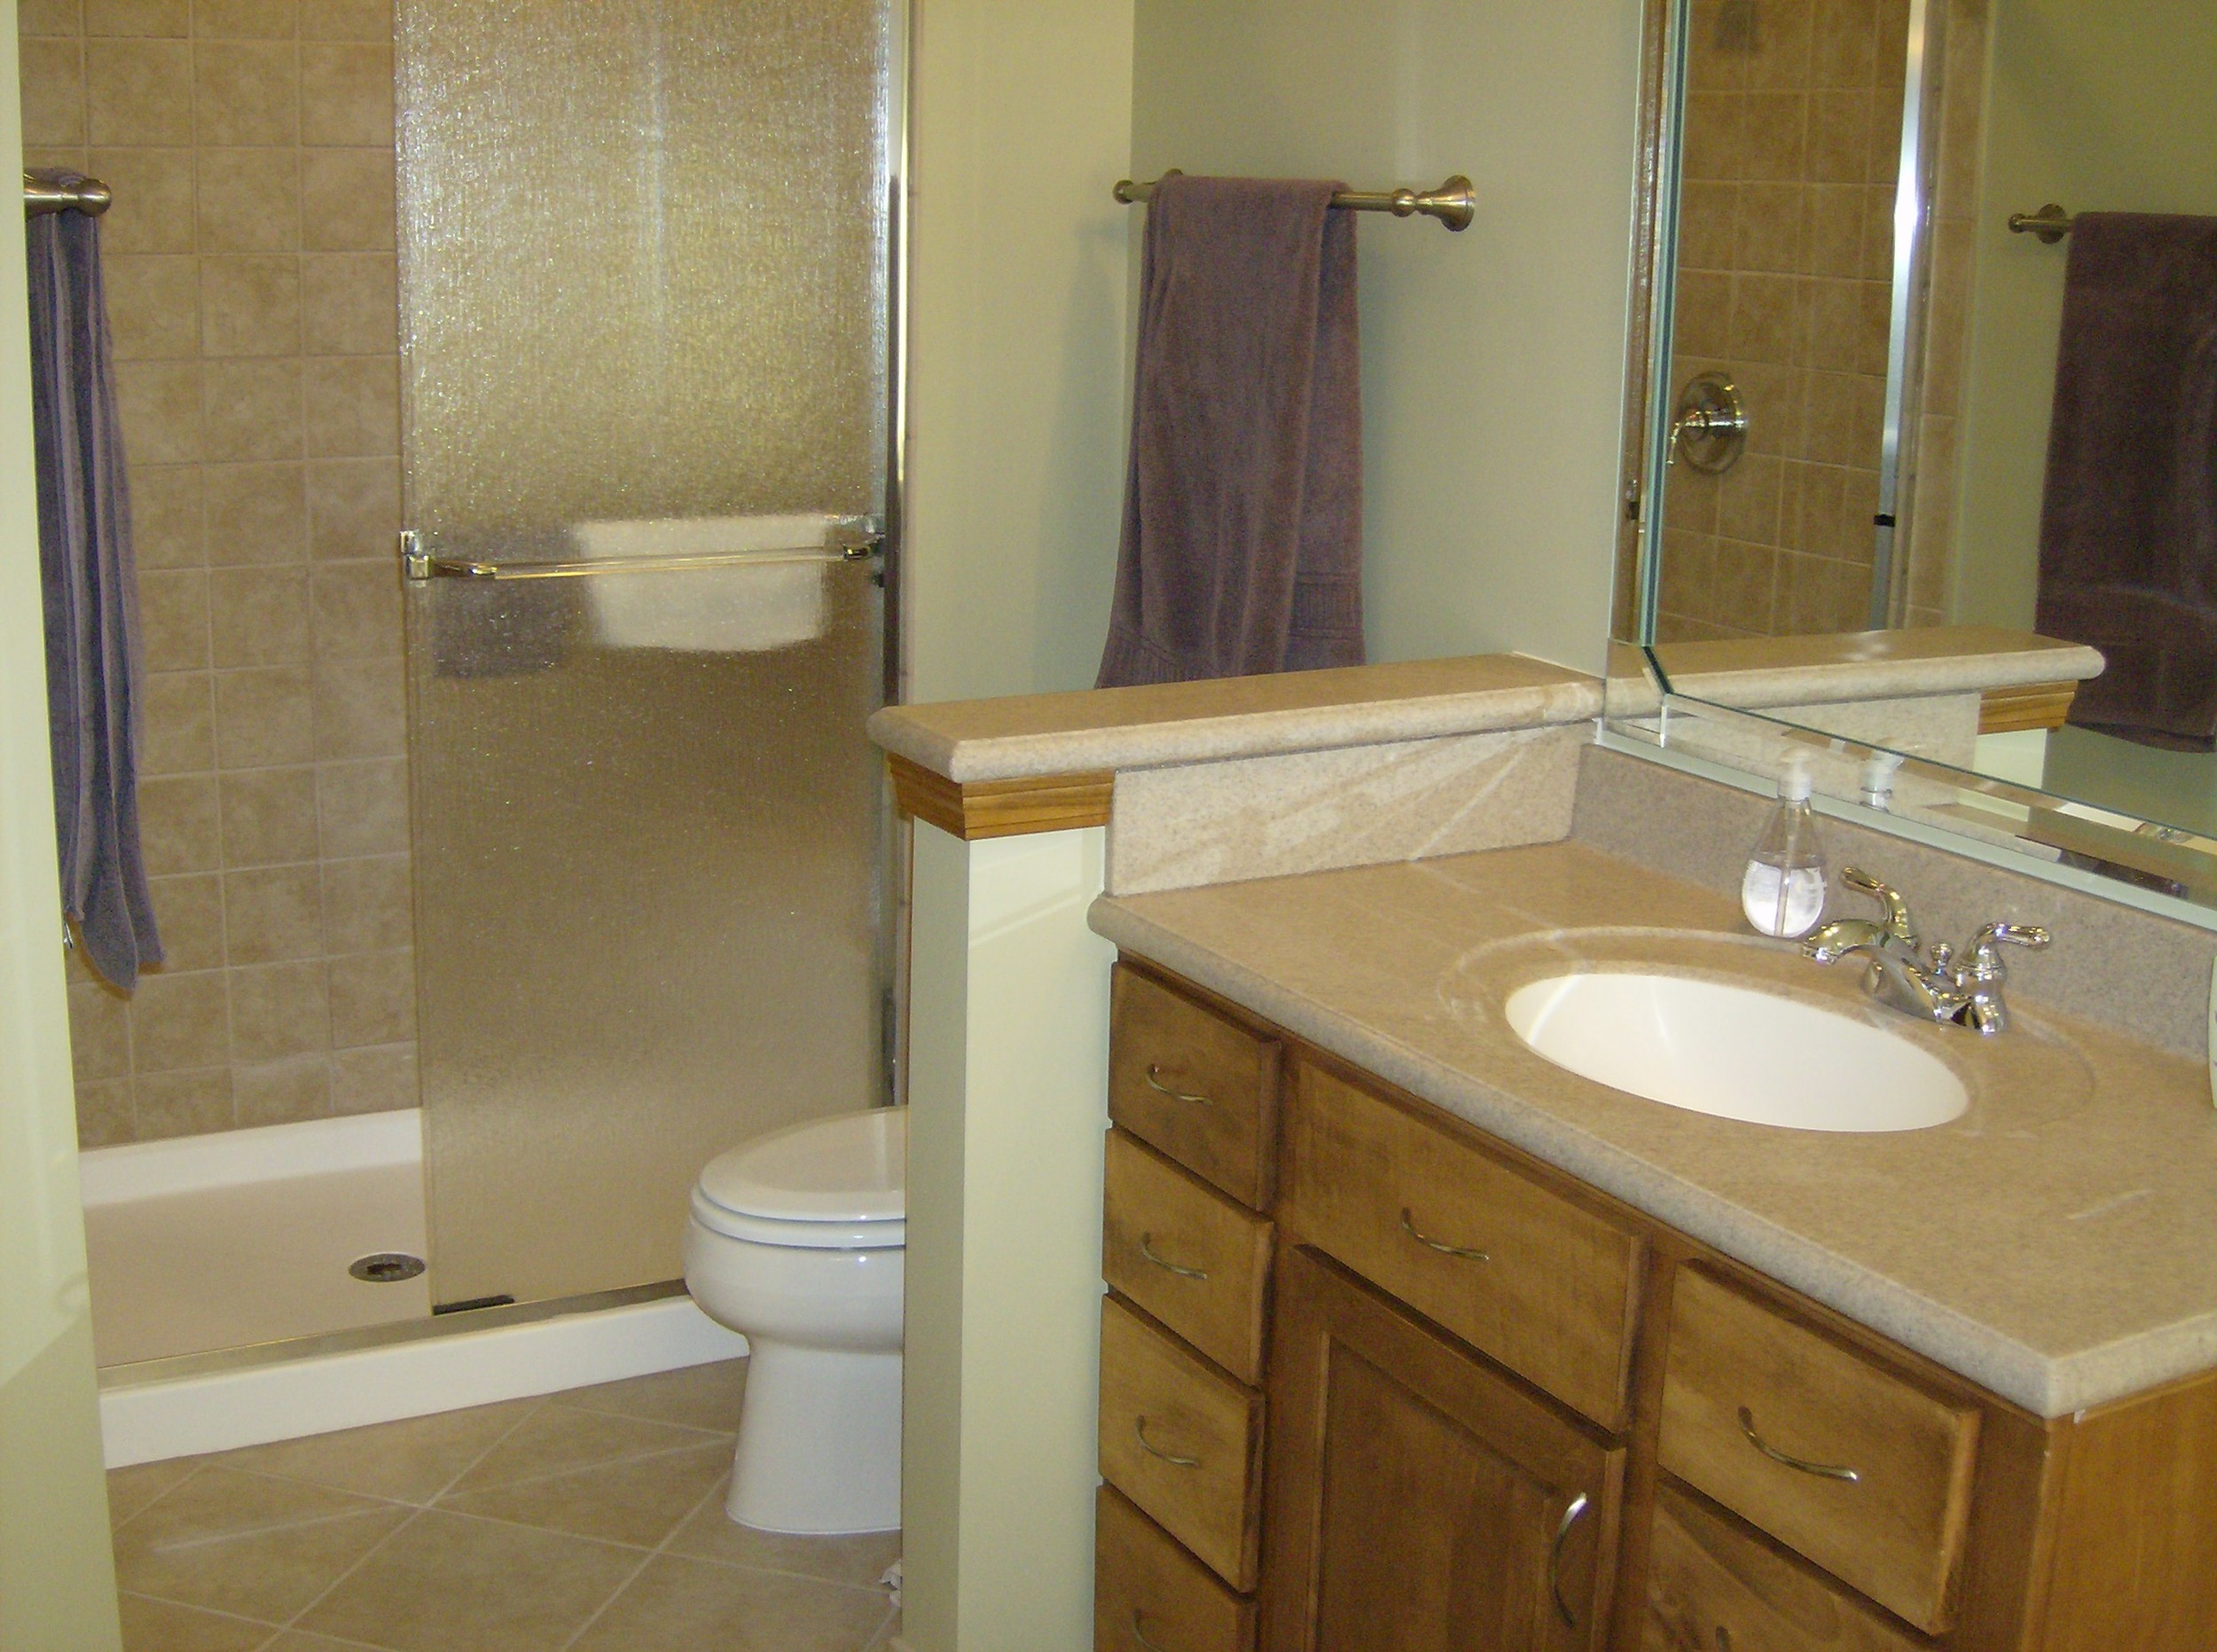 Bath-remodeling-residential-indianapolis-indiana.jpg